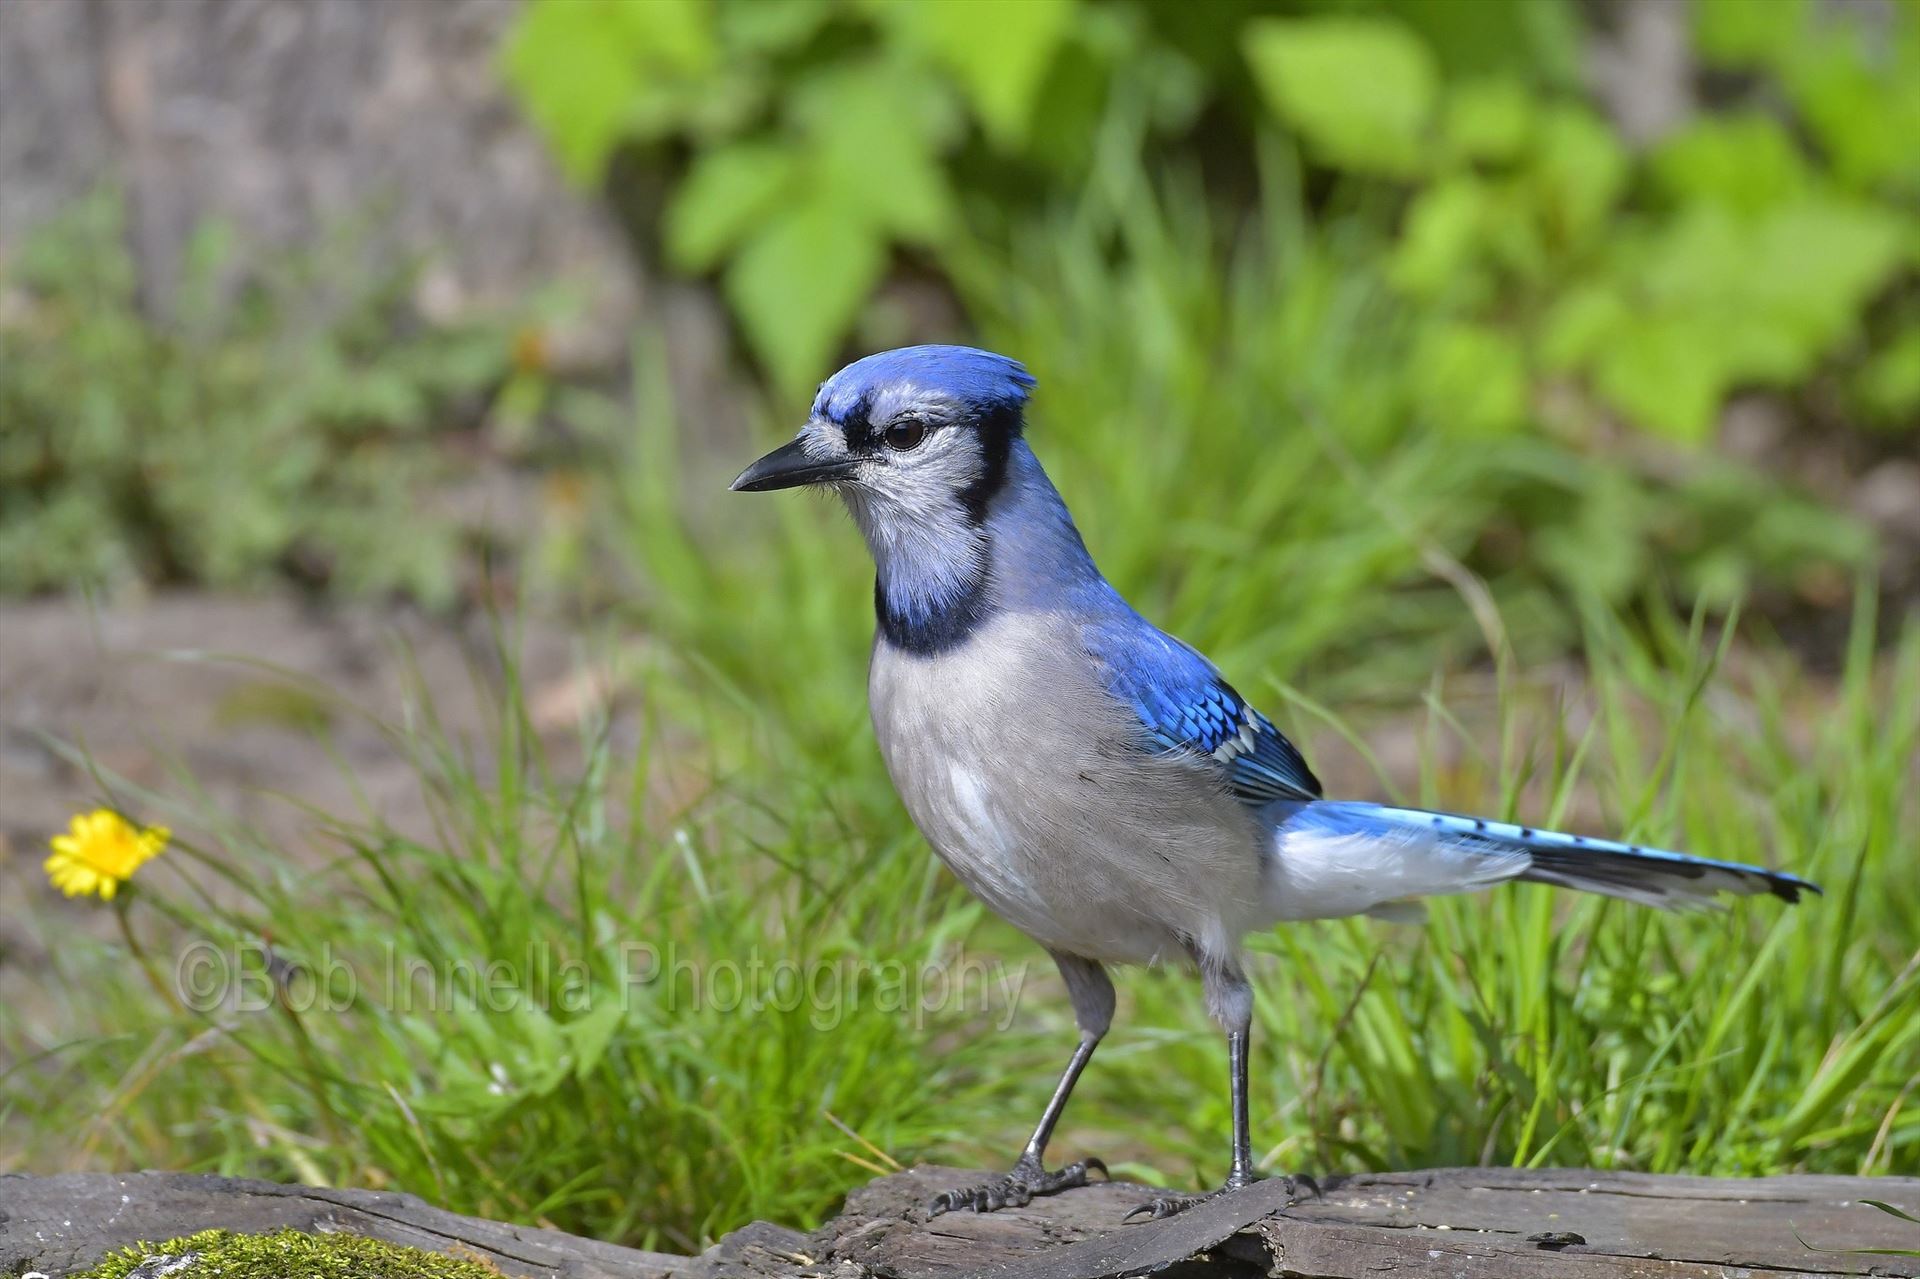 Pennsylvanian BlueJay From The Wilds Of Pennsylvania by Buckmaster